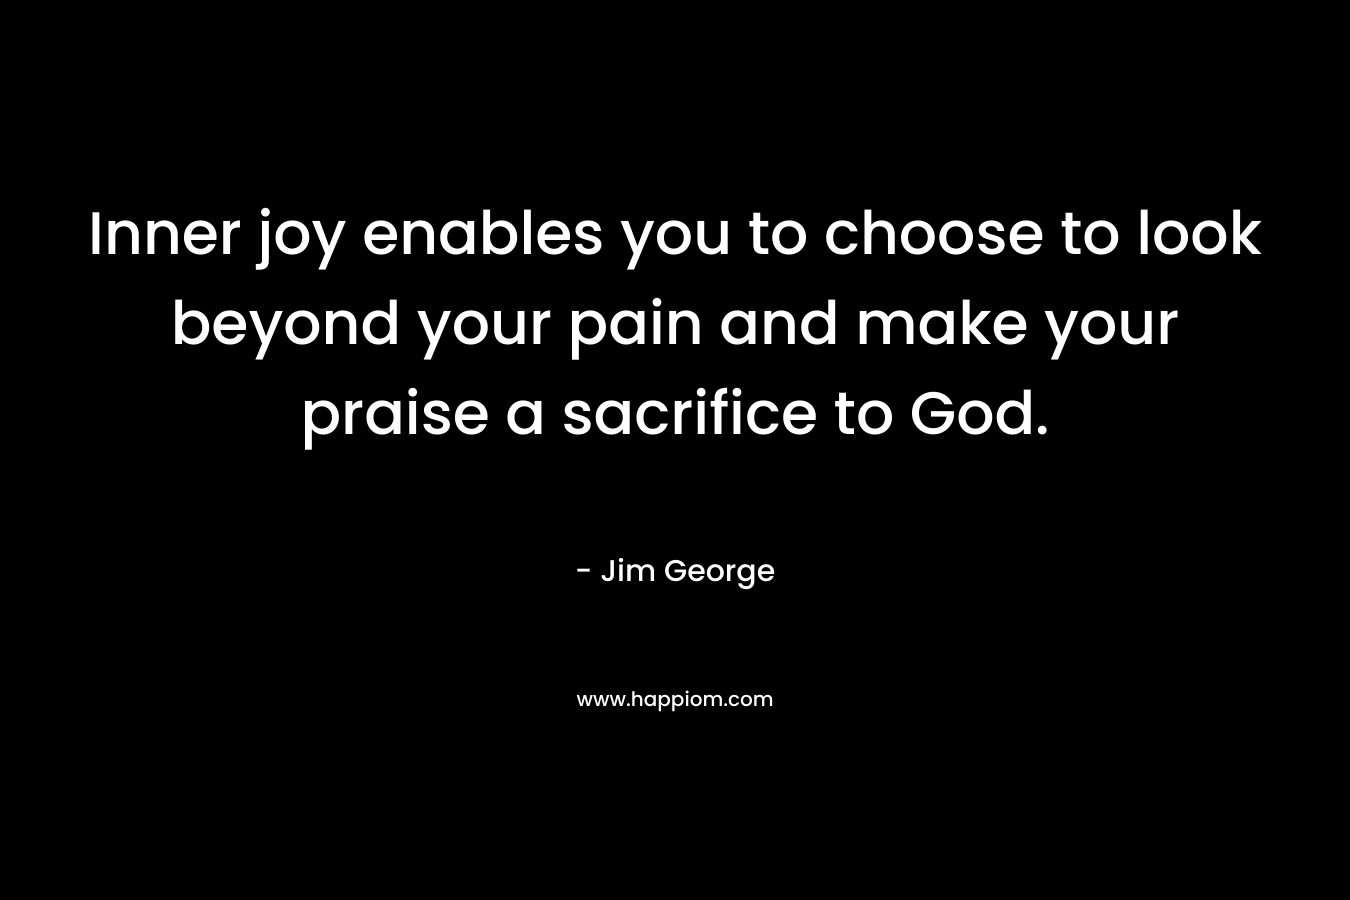 Inner joy enables you to choose to look beyond your pain and make your praise a sacrifice to God.